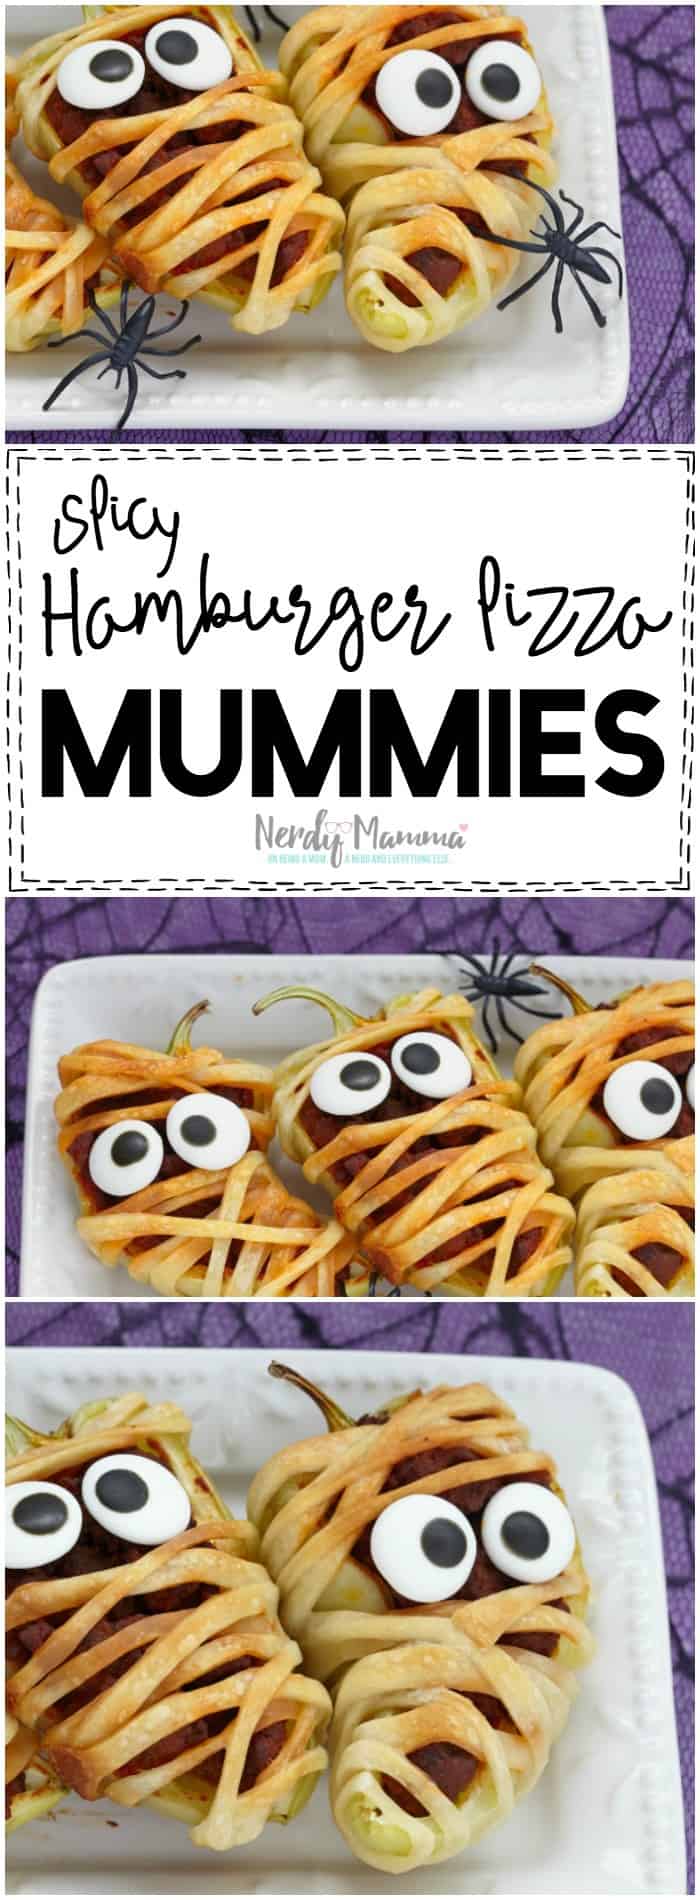 OOOH! I love this recipe for Spicy Hamburger Pizza Mummies! So cute...and SO easy! LOL!